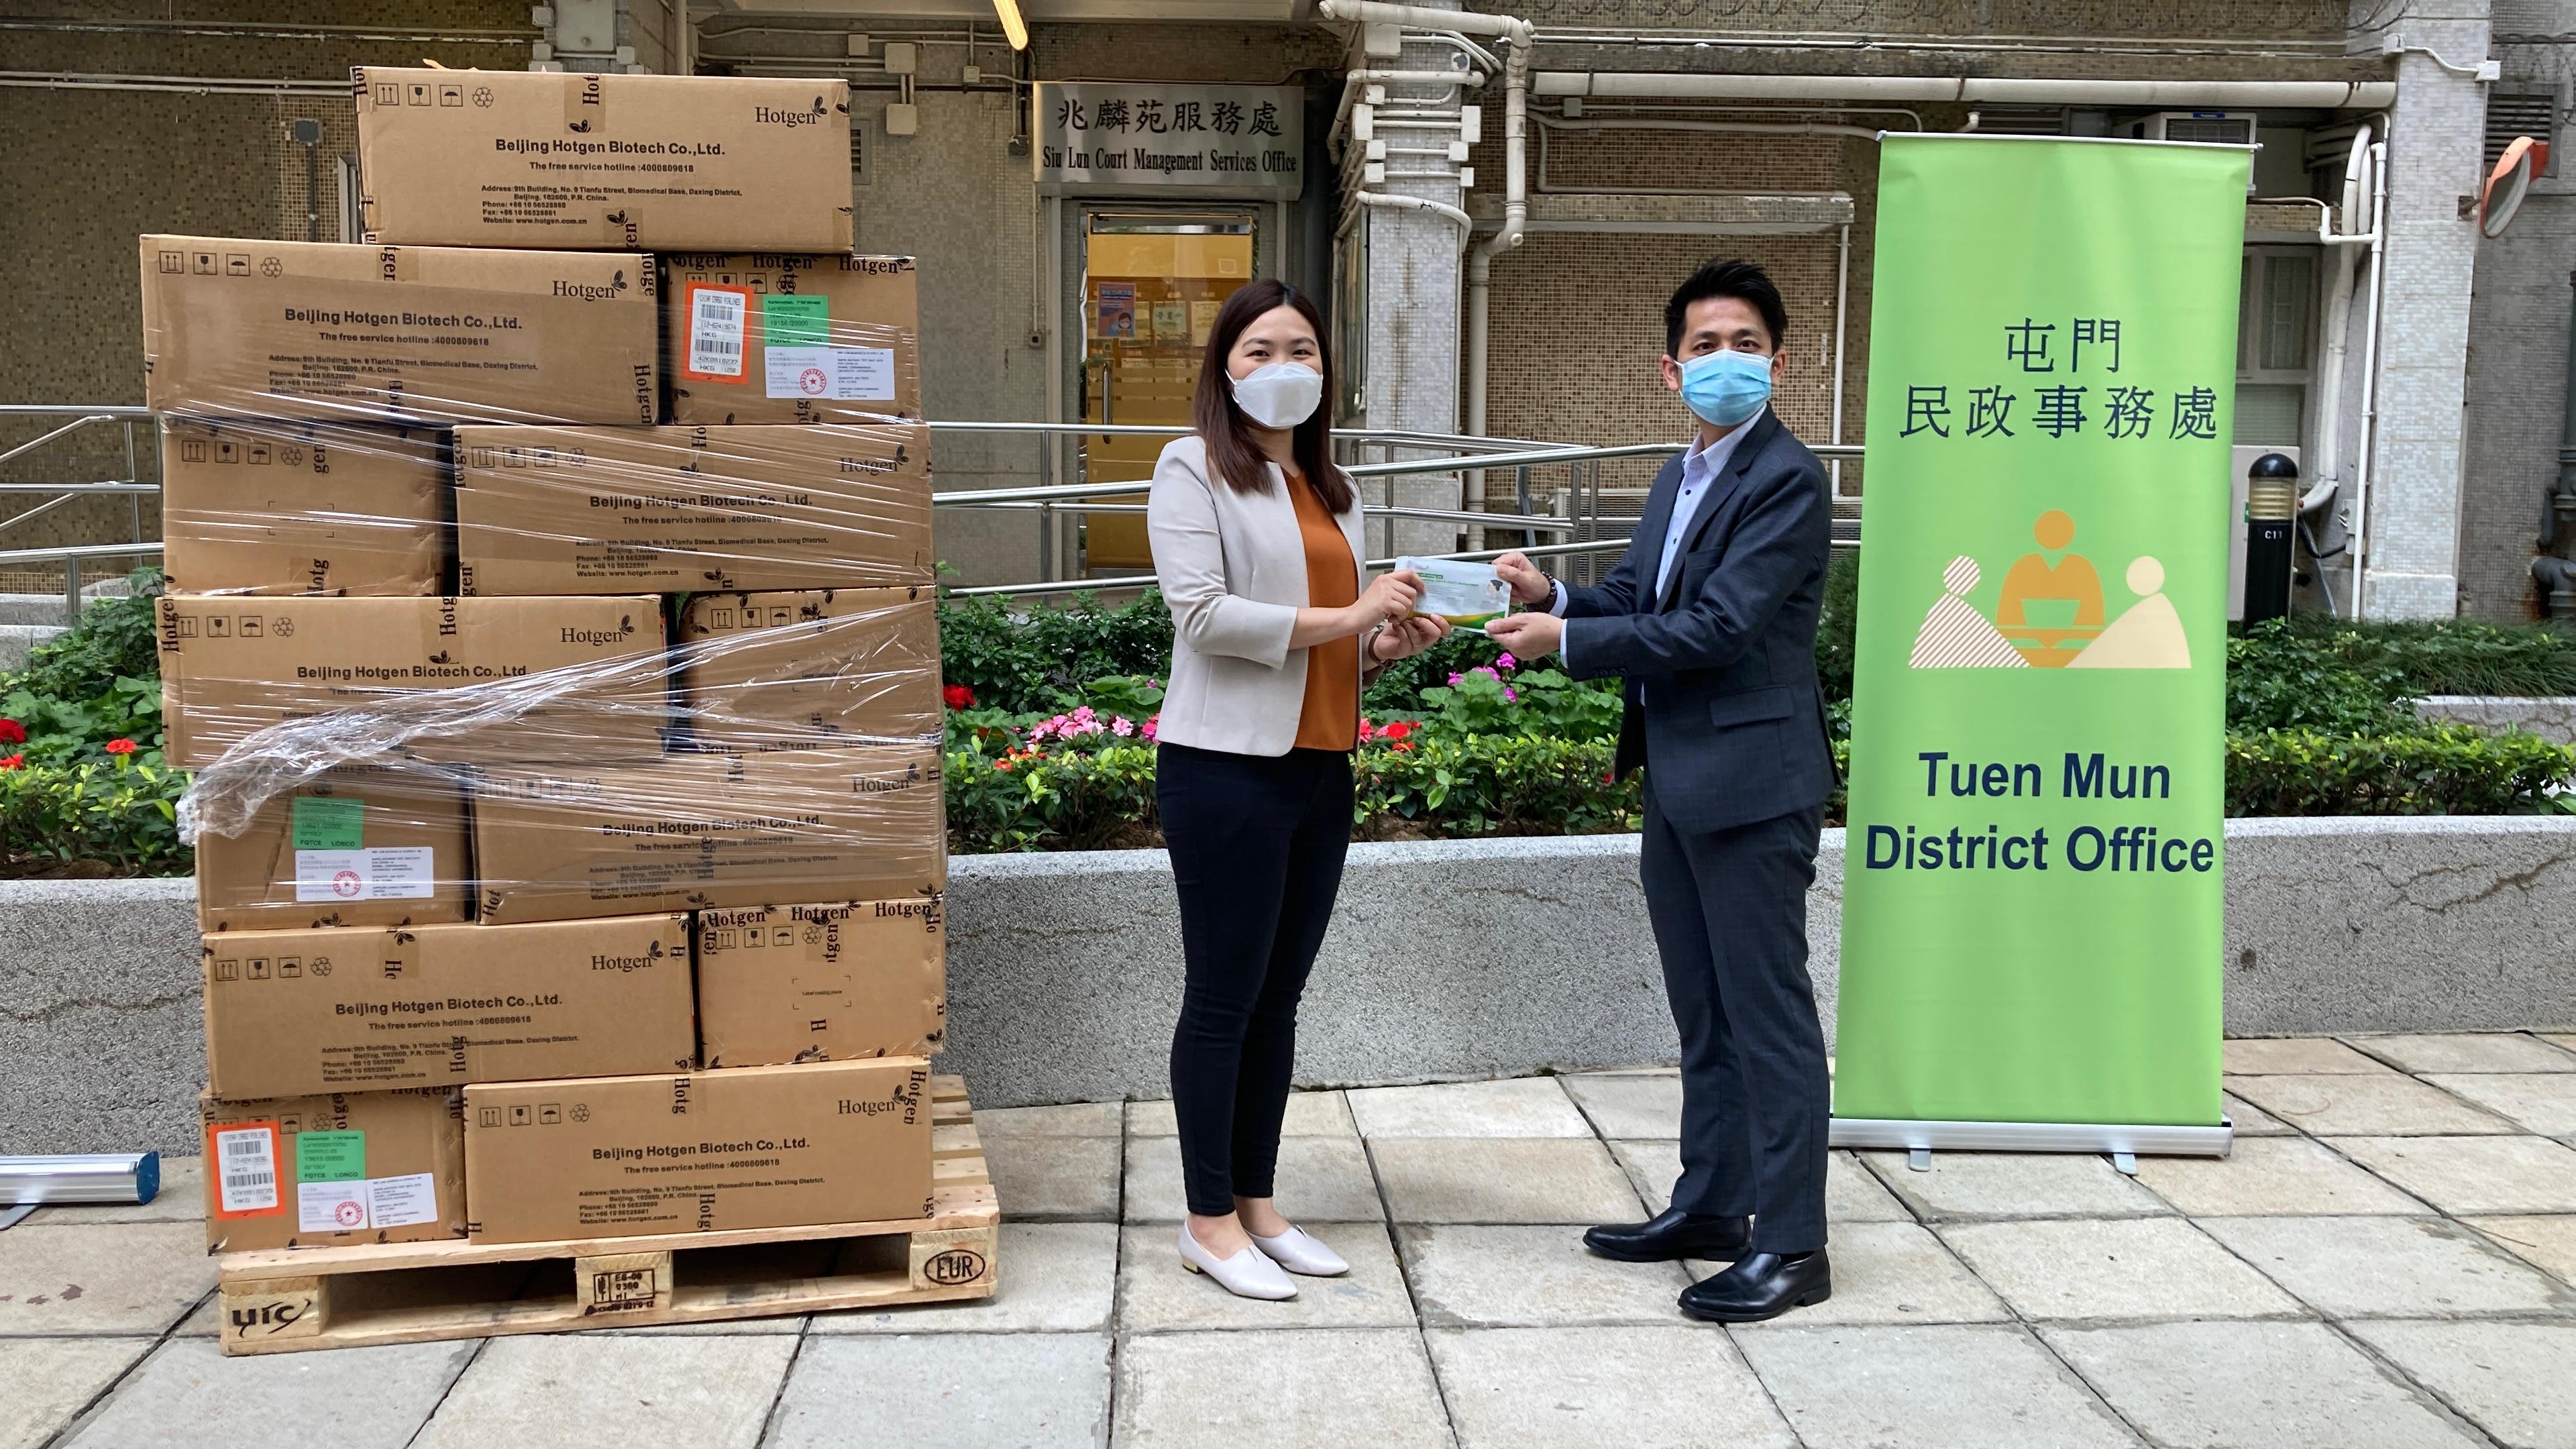 The Tuen Mun District Office today (March 4) distributed COVID-19 rapid test kits to households, cleansing workers and property management staff living and working in  Siu Lun Court for voluntary testing through the property management company.